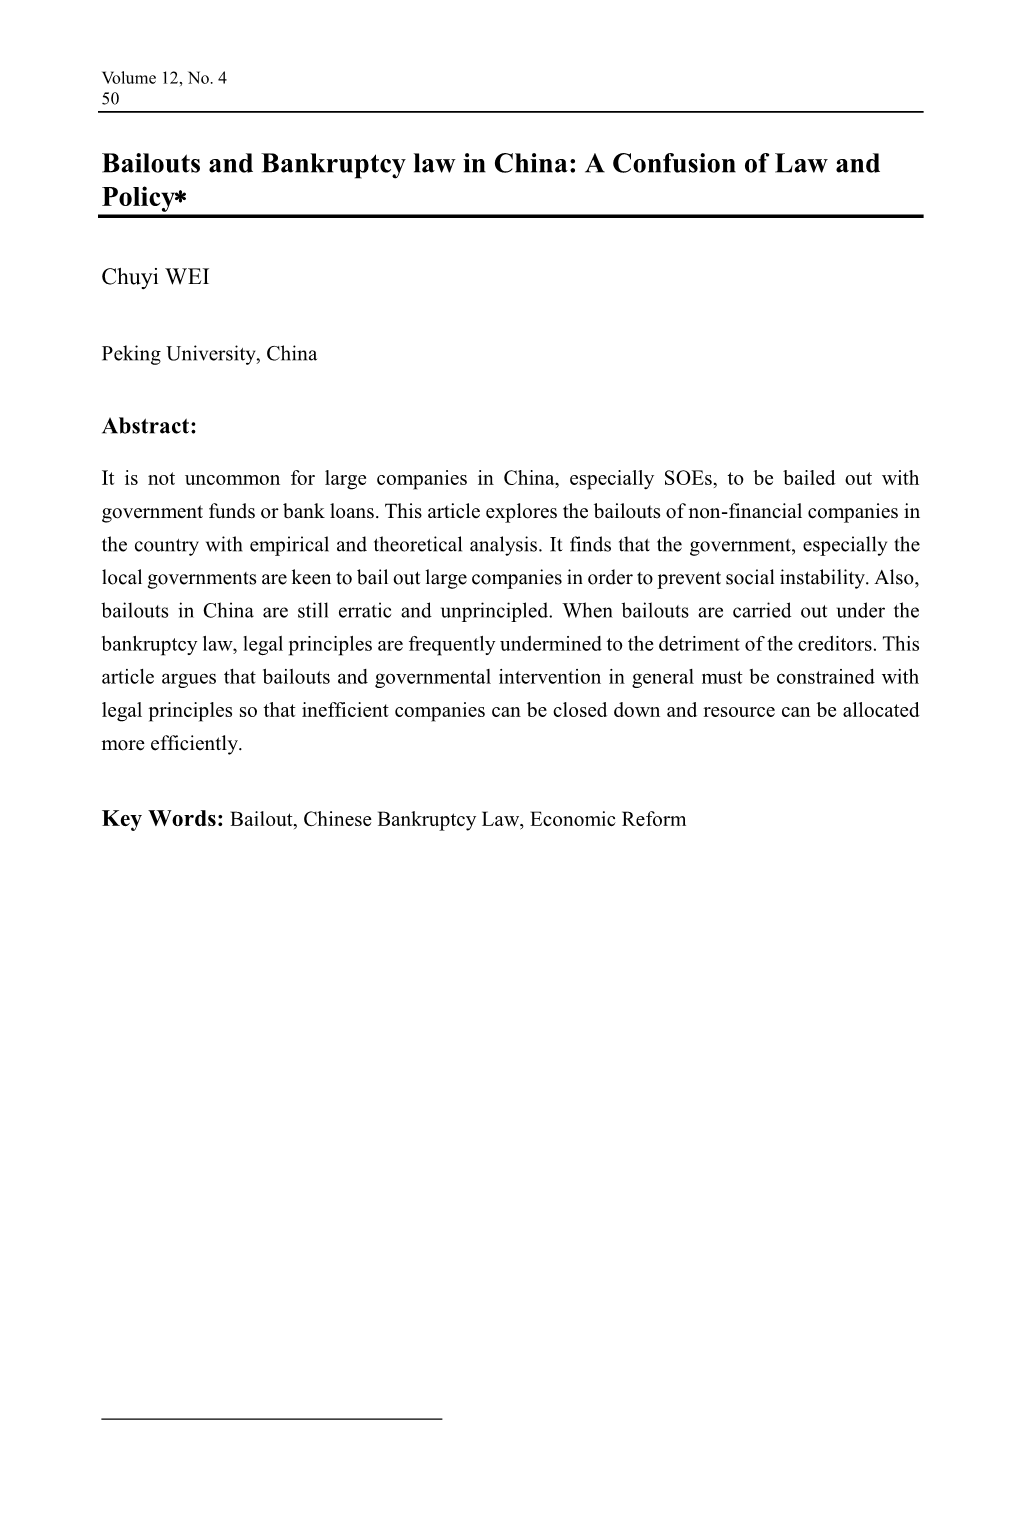 Bailouts and Bankruptcy Law in China: a Confusion of Law and Policy*